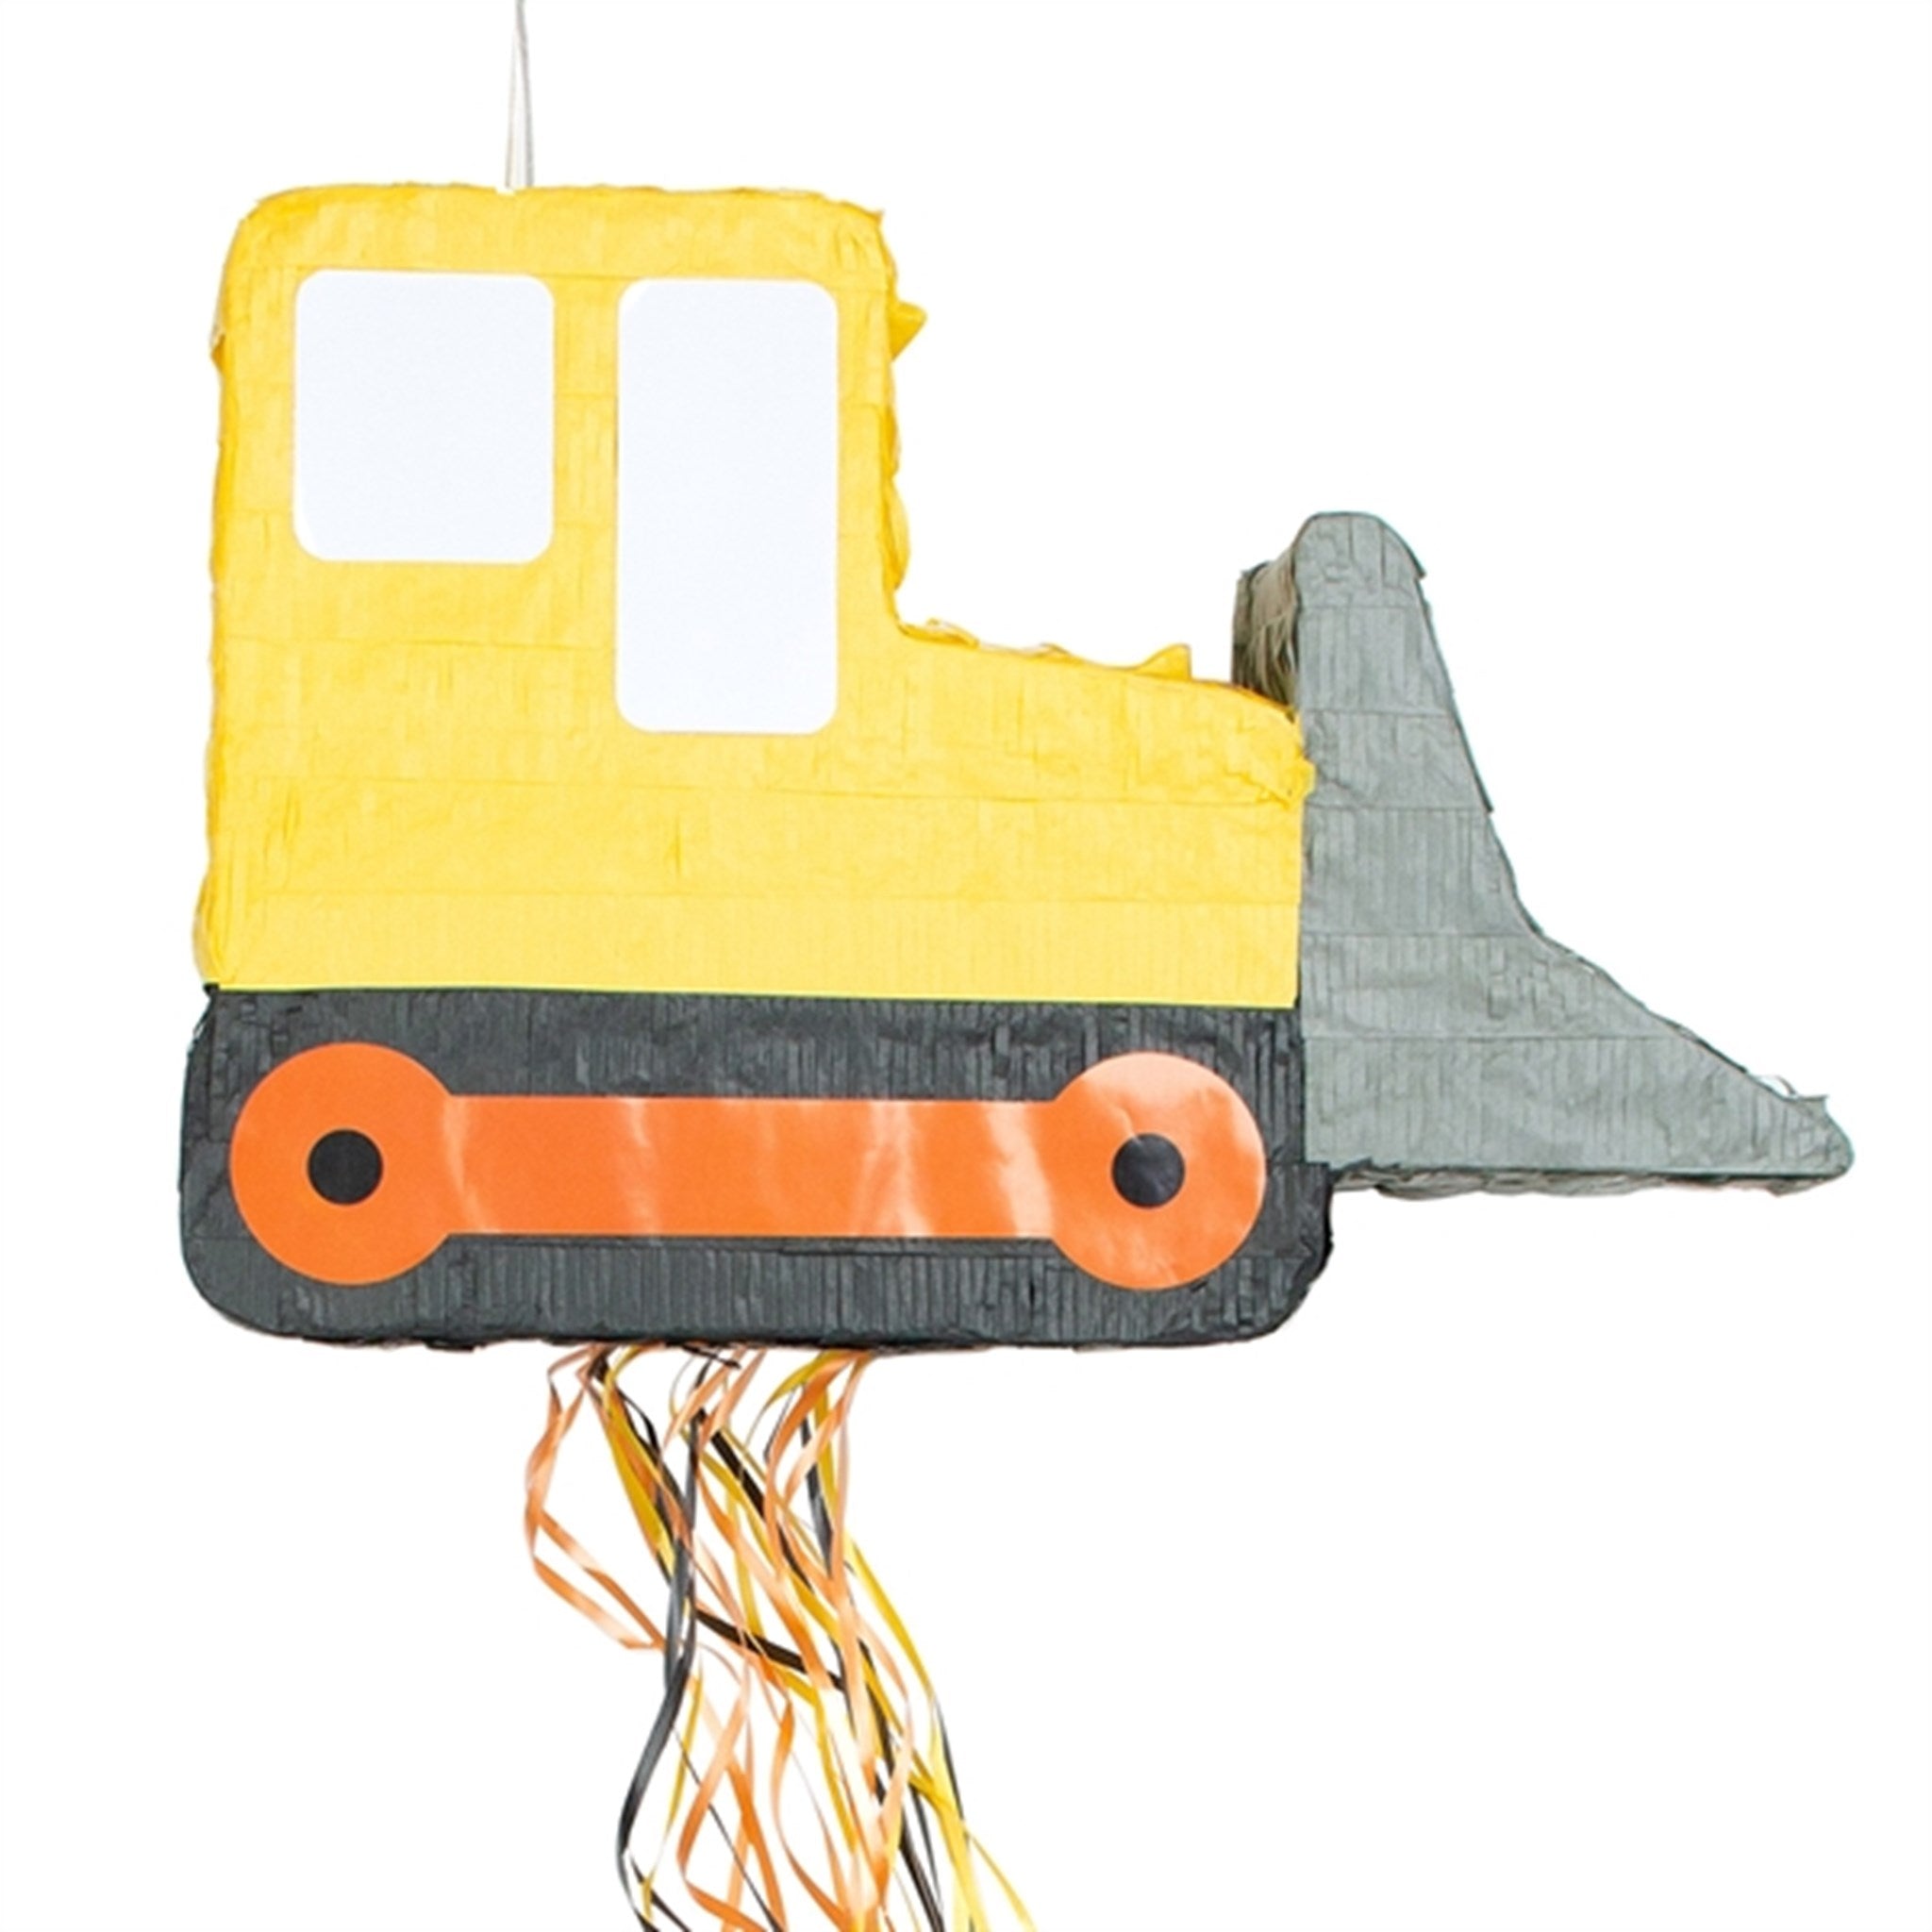 My Little Day Construction Pinata